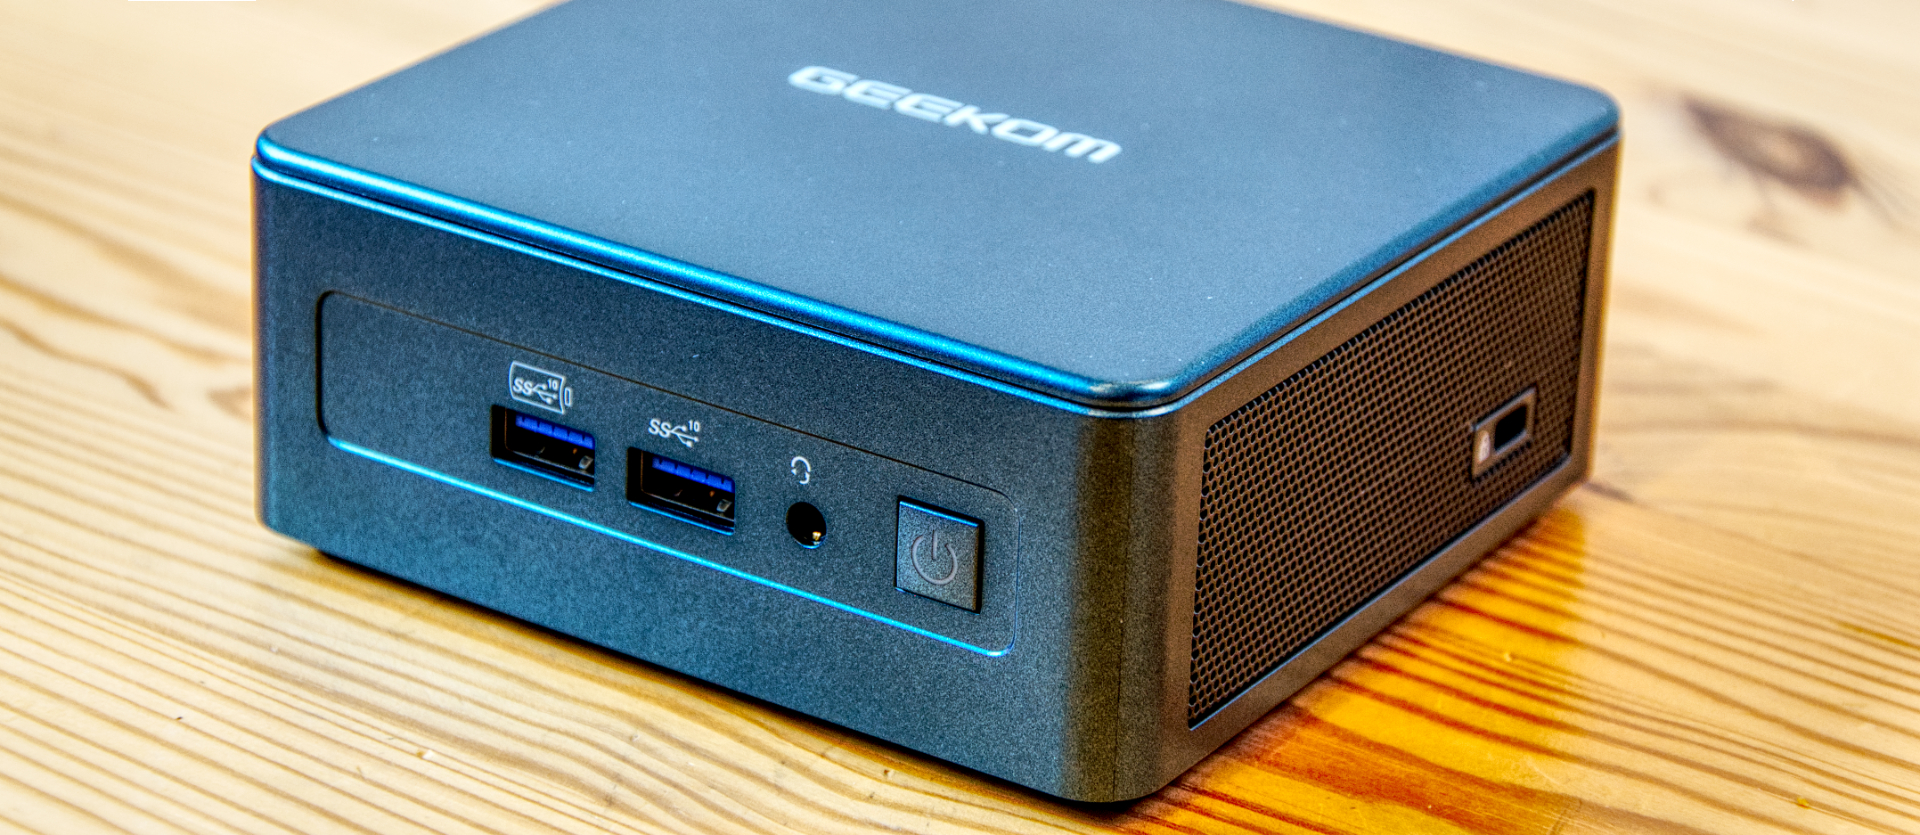 GEEKOM's Mini IT13 PC is small in size but big on power